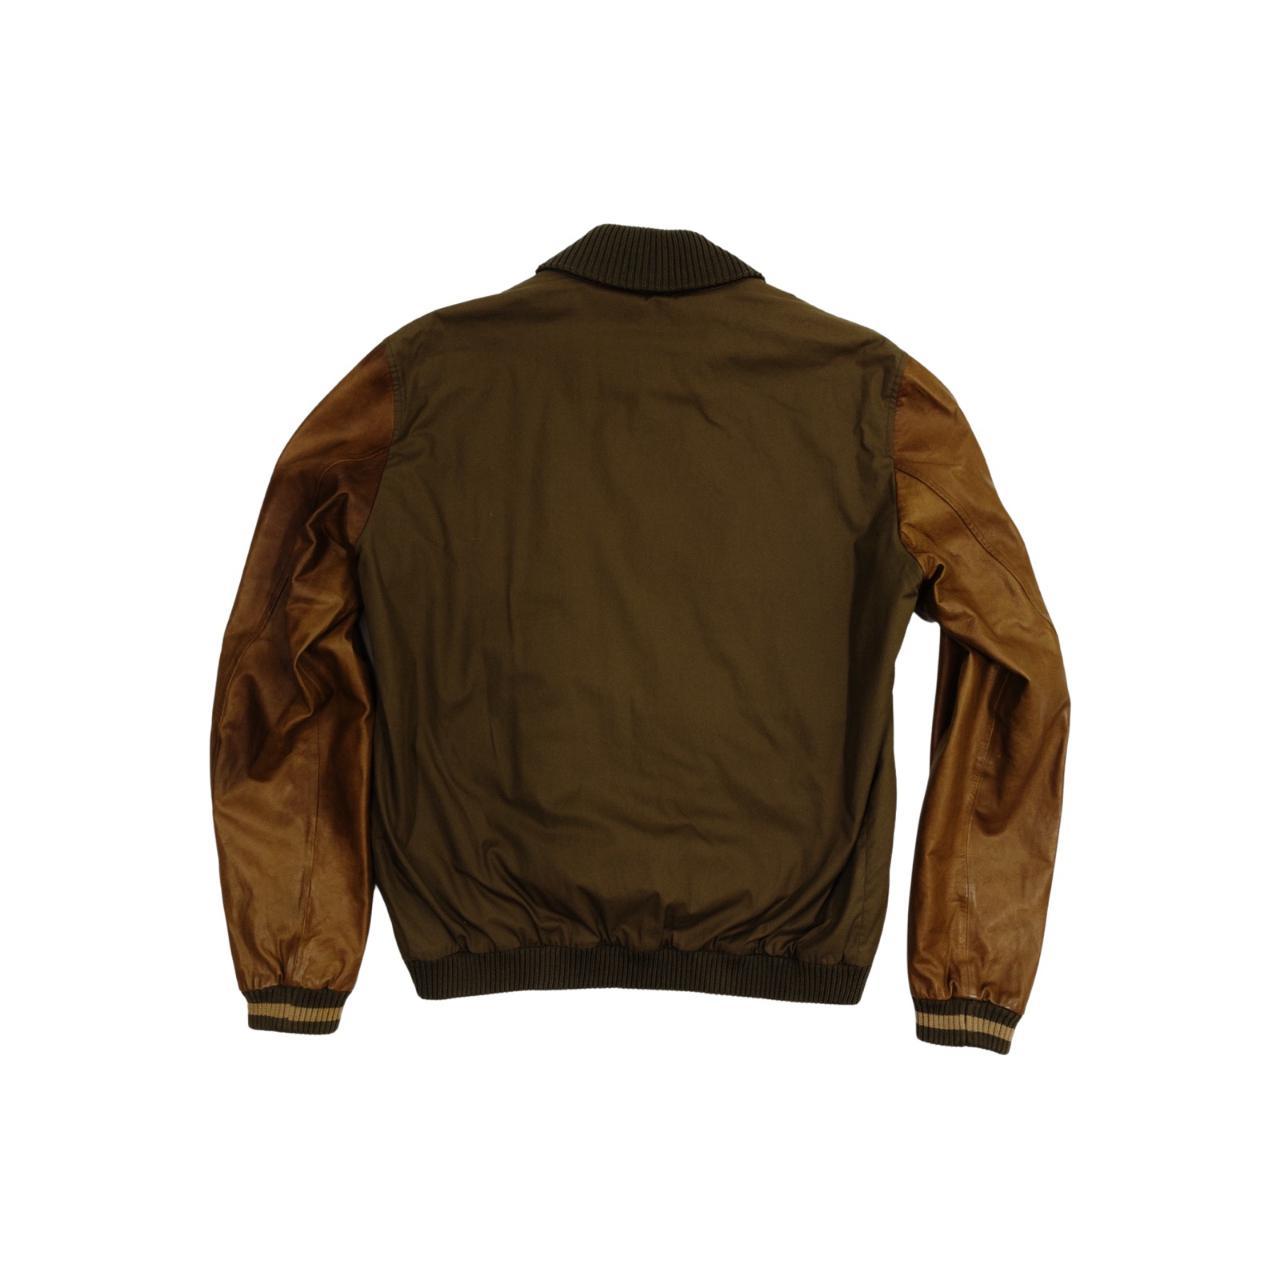 Gucci Men's Brown and Green Jacket (2)